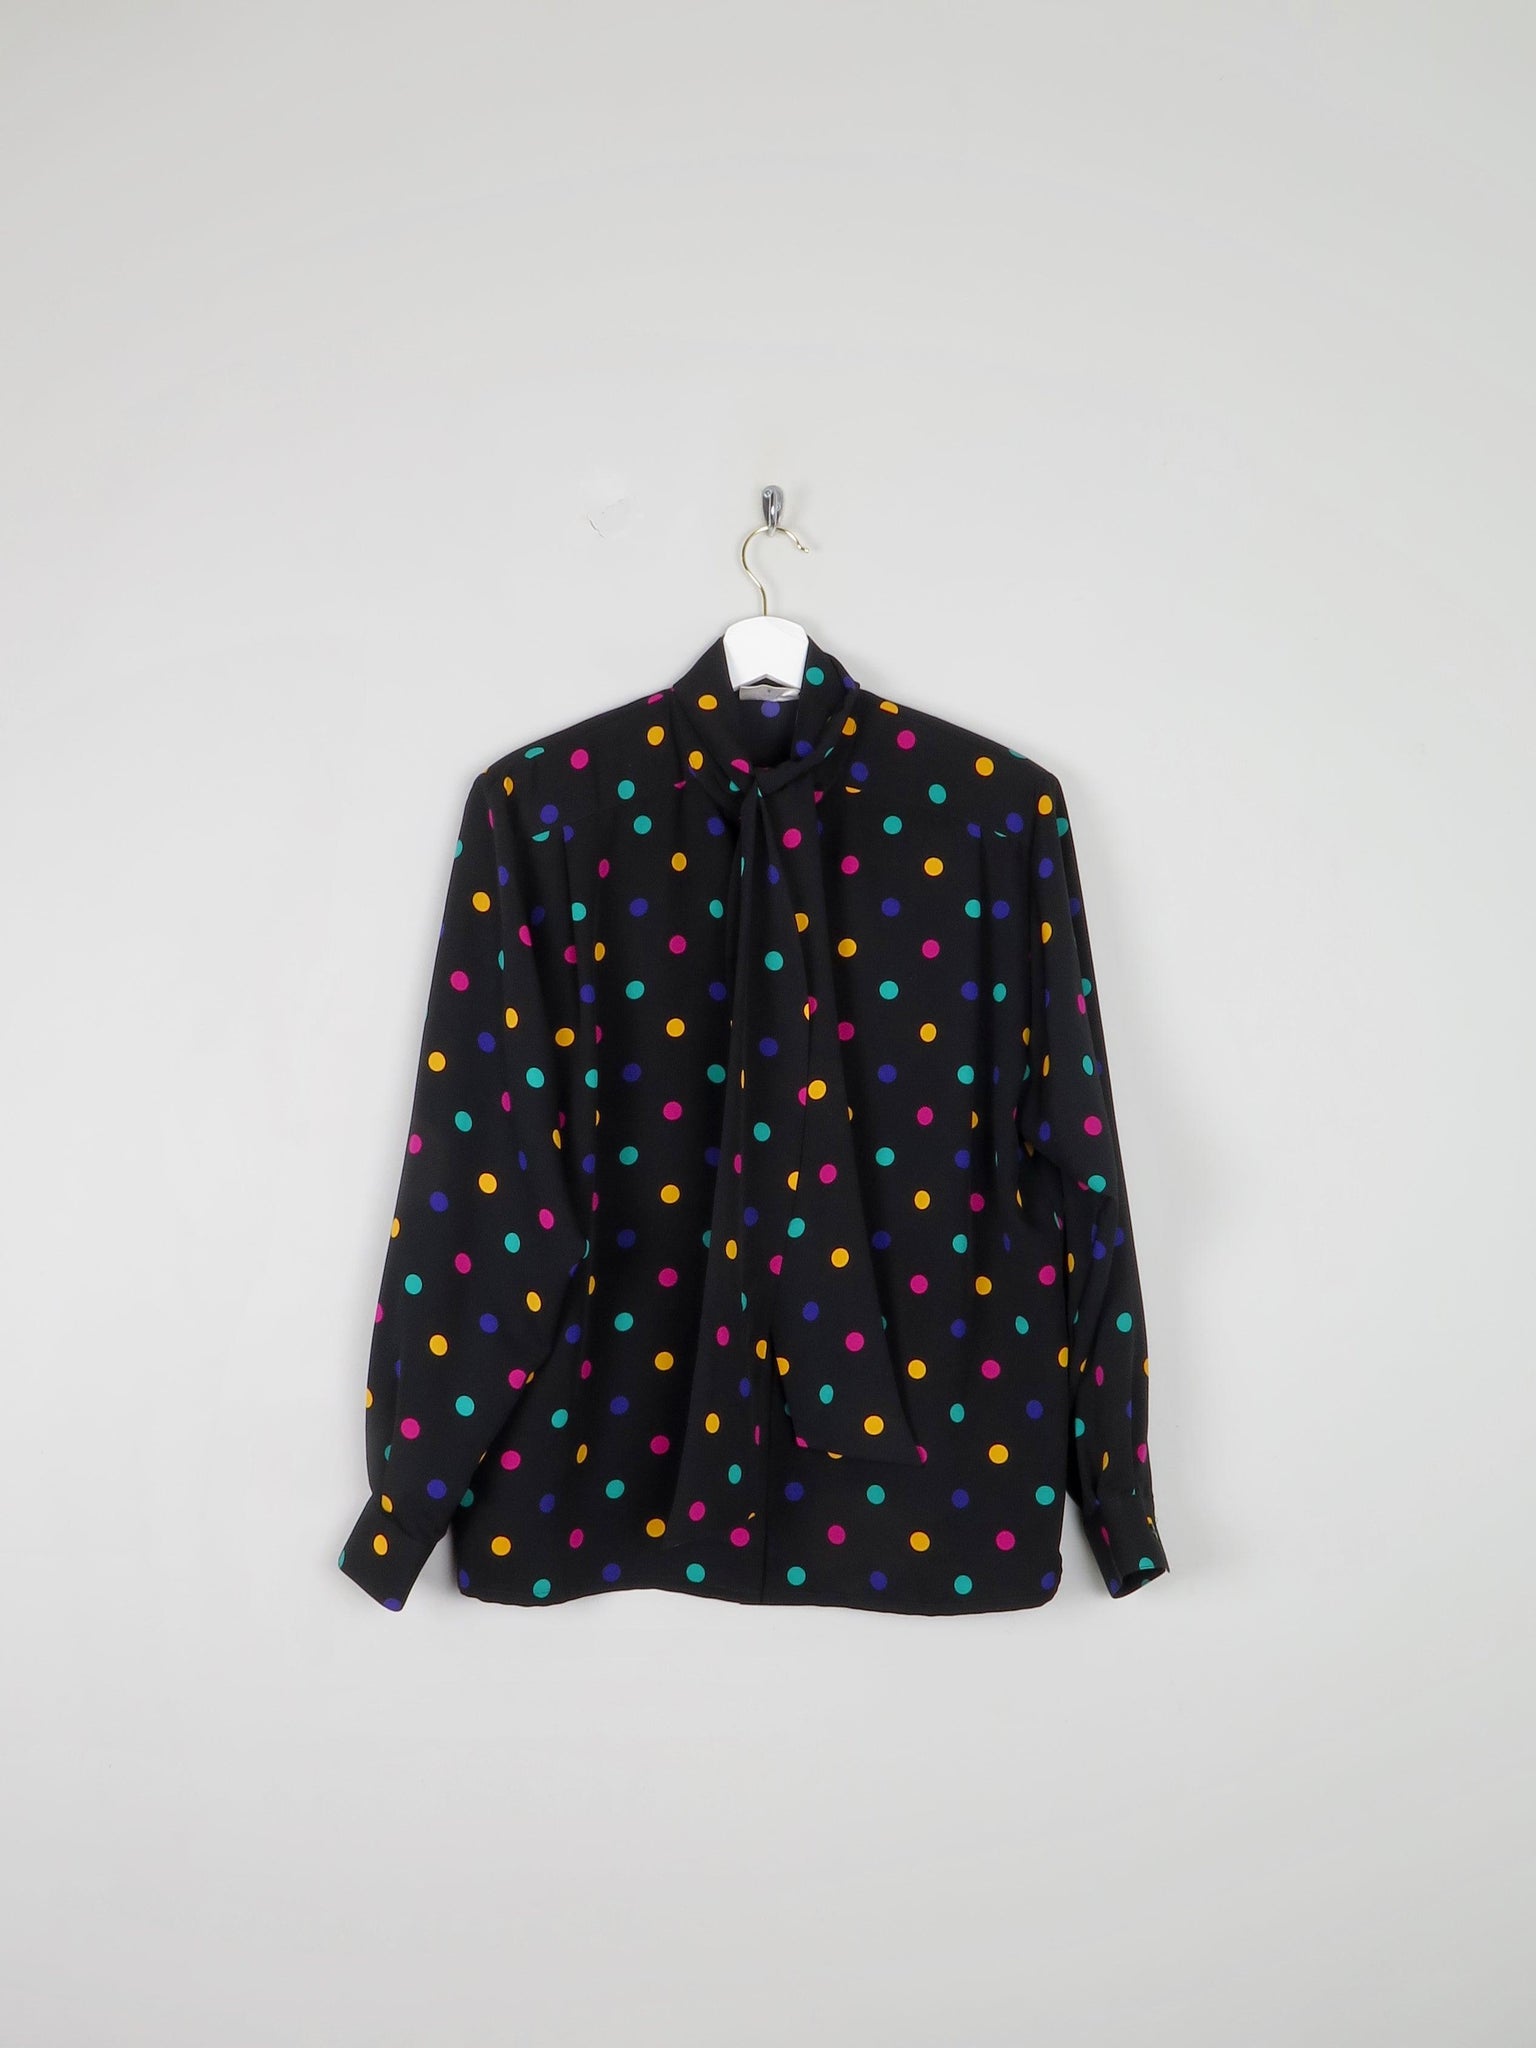 Women's Colourful Polka Dot Blouse With Tie Neck M - The Harlequin